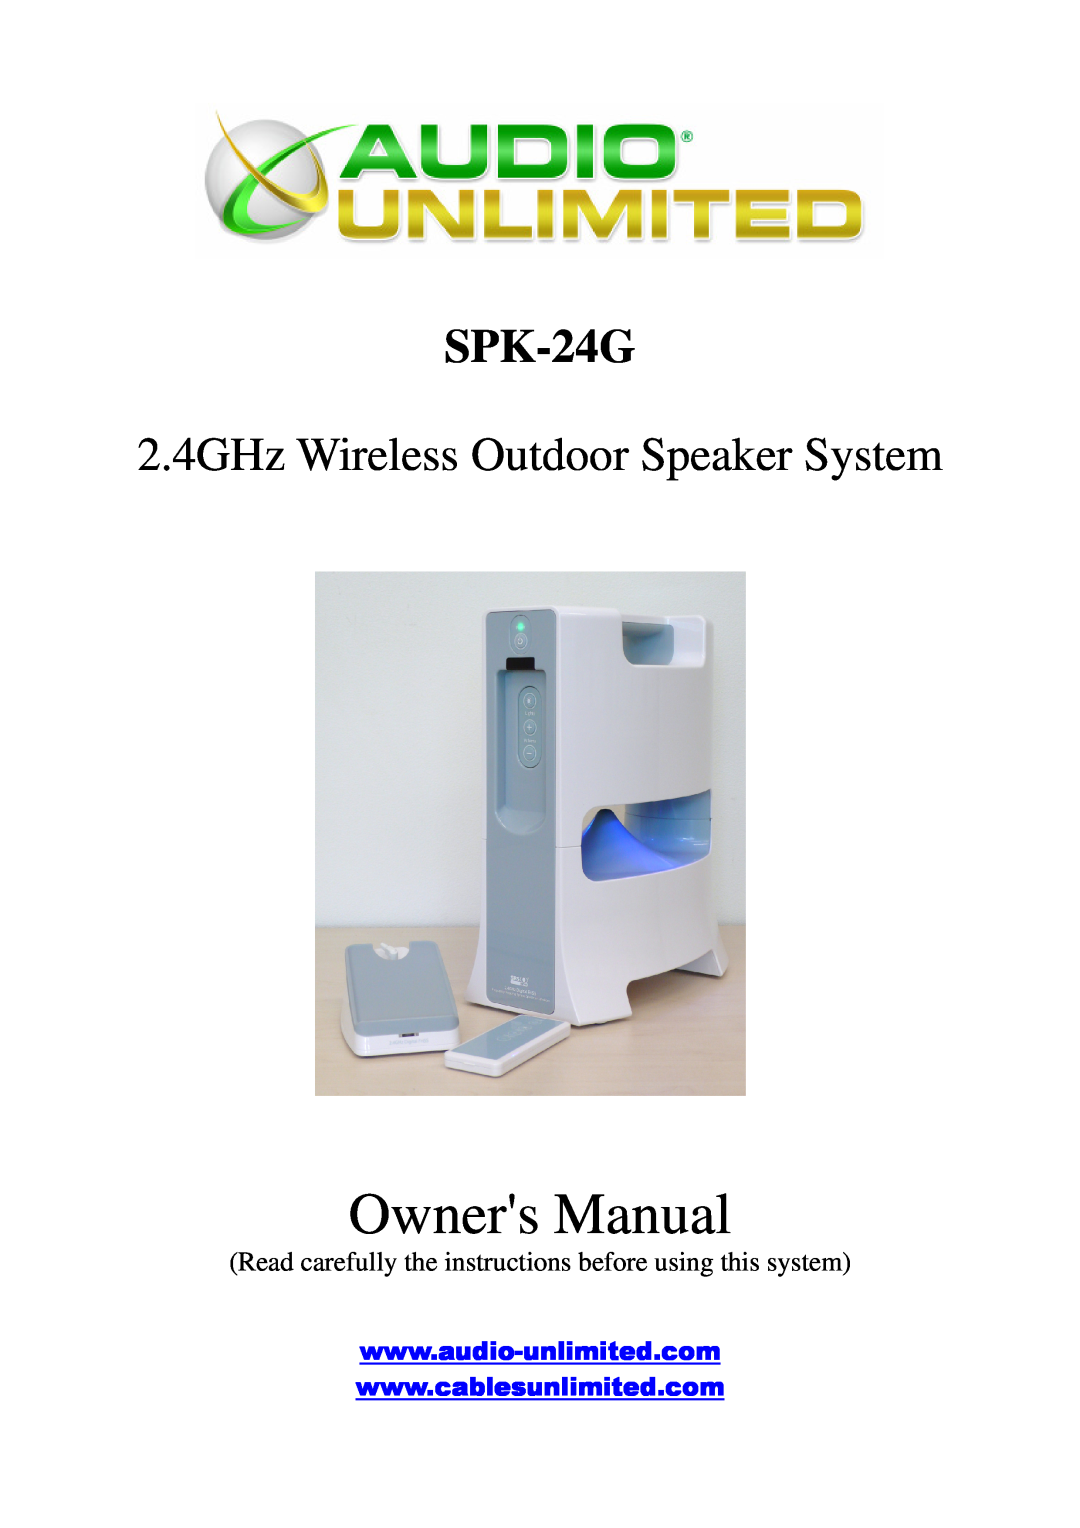 Cables Unlimited SPK-24G owner manual 2.4GHz Wireless Outdoor Speaker System 